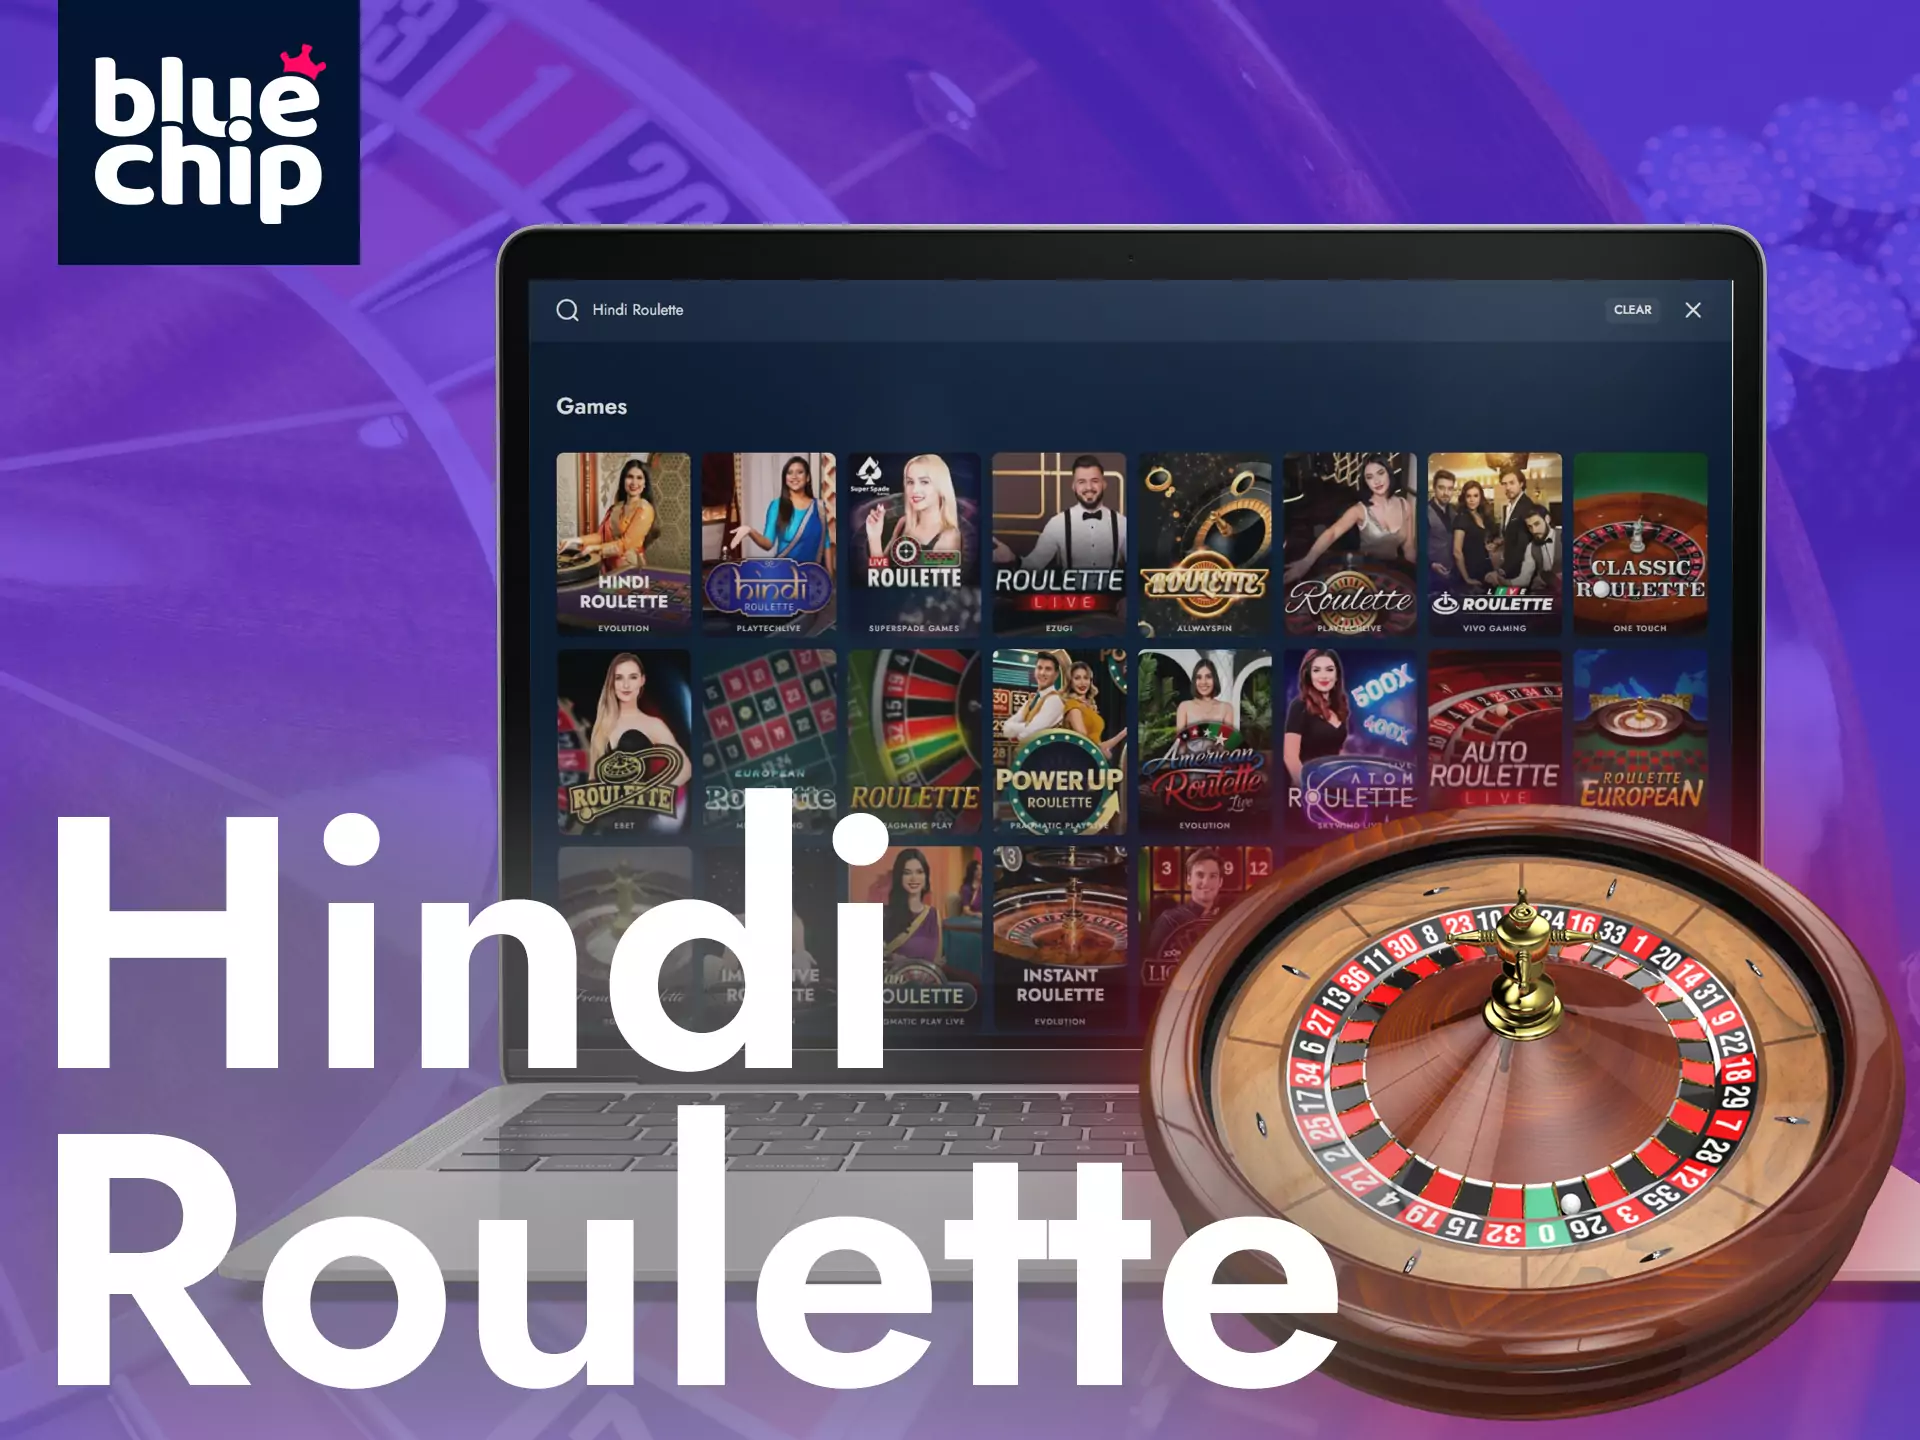 In the Bluechip Casino, you find different types of online roulette.